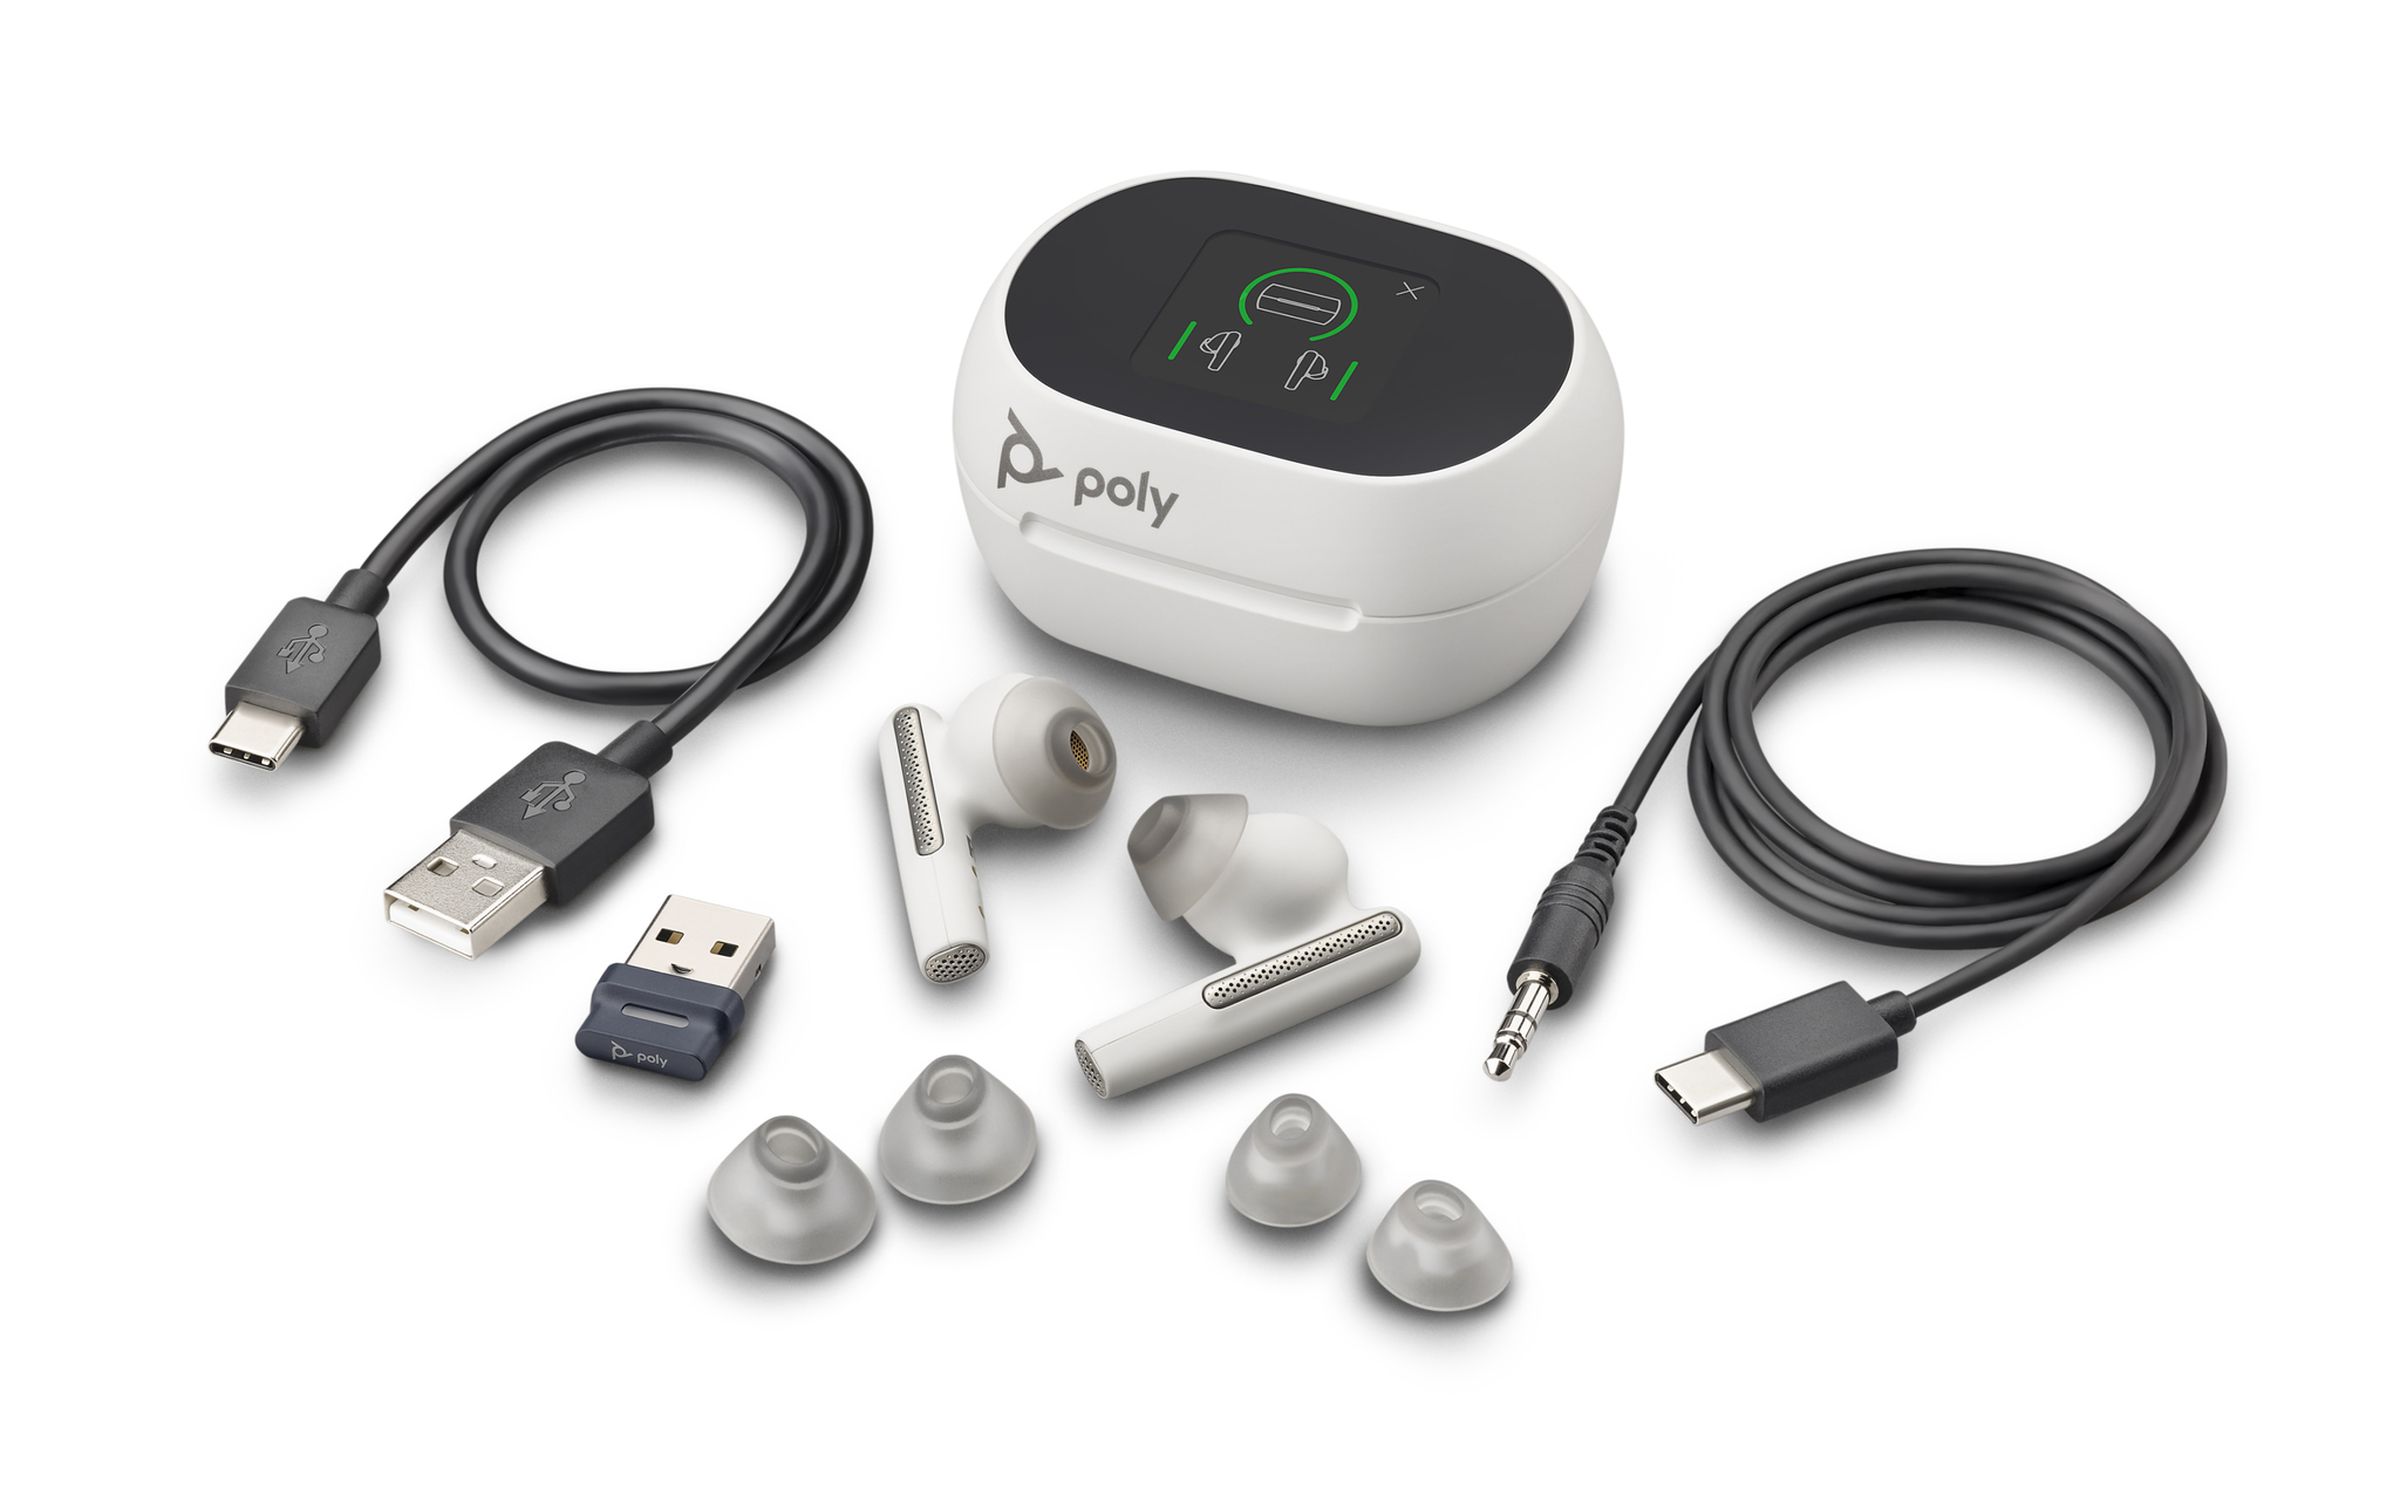 Picture of the Poly Voyager Free 60 Plus showing its USB A to USB C charging cable, USB A bluetooth dongle, three sets of silicone tips, the earbuds, the charging case with screen, and a USB C to 3.5mm headphone jack cable.